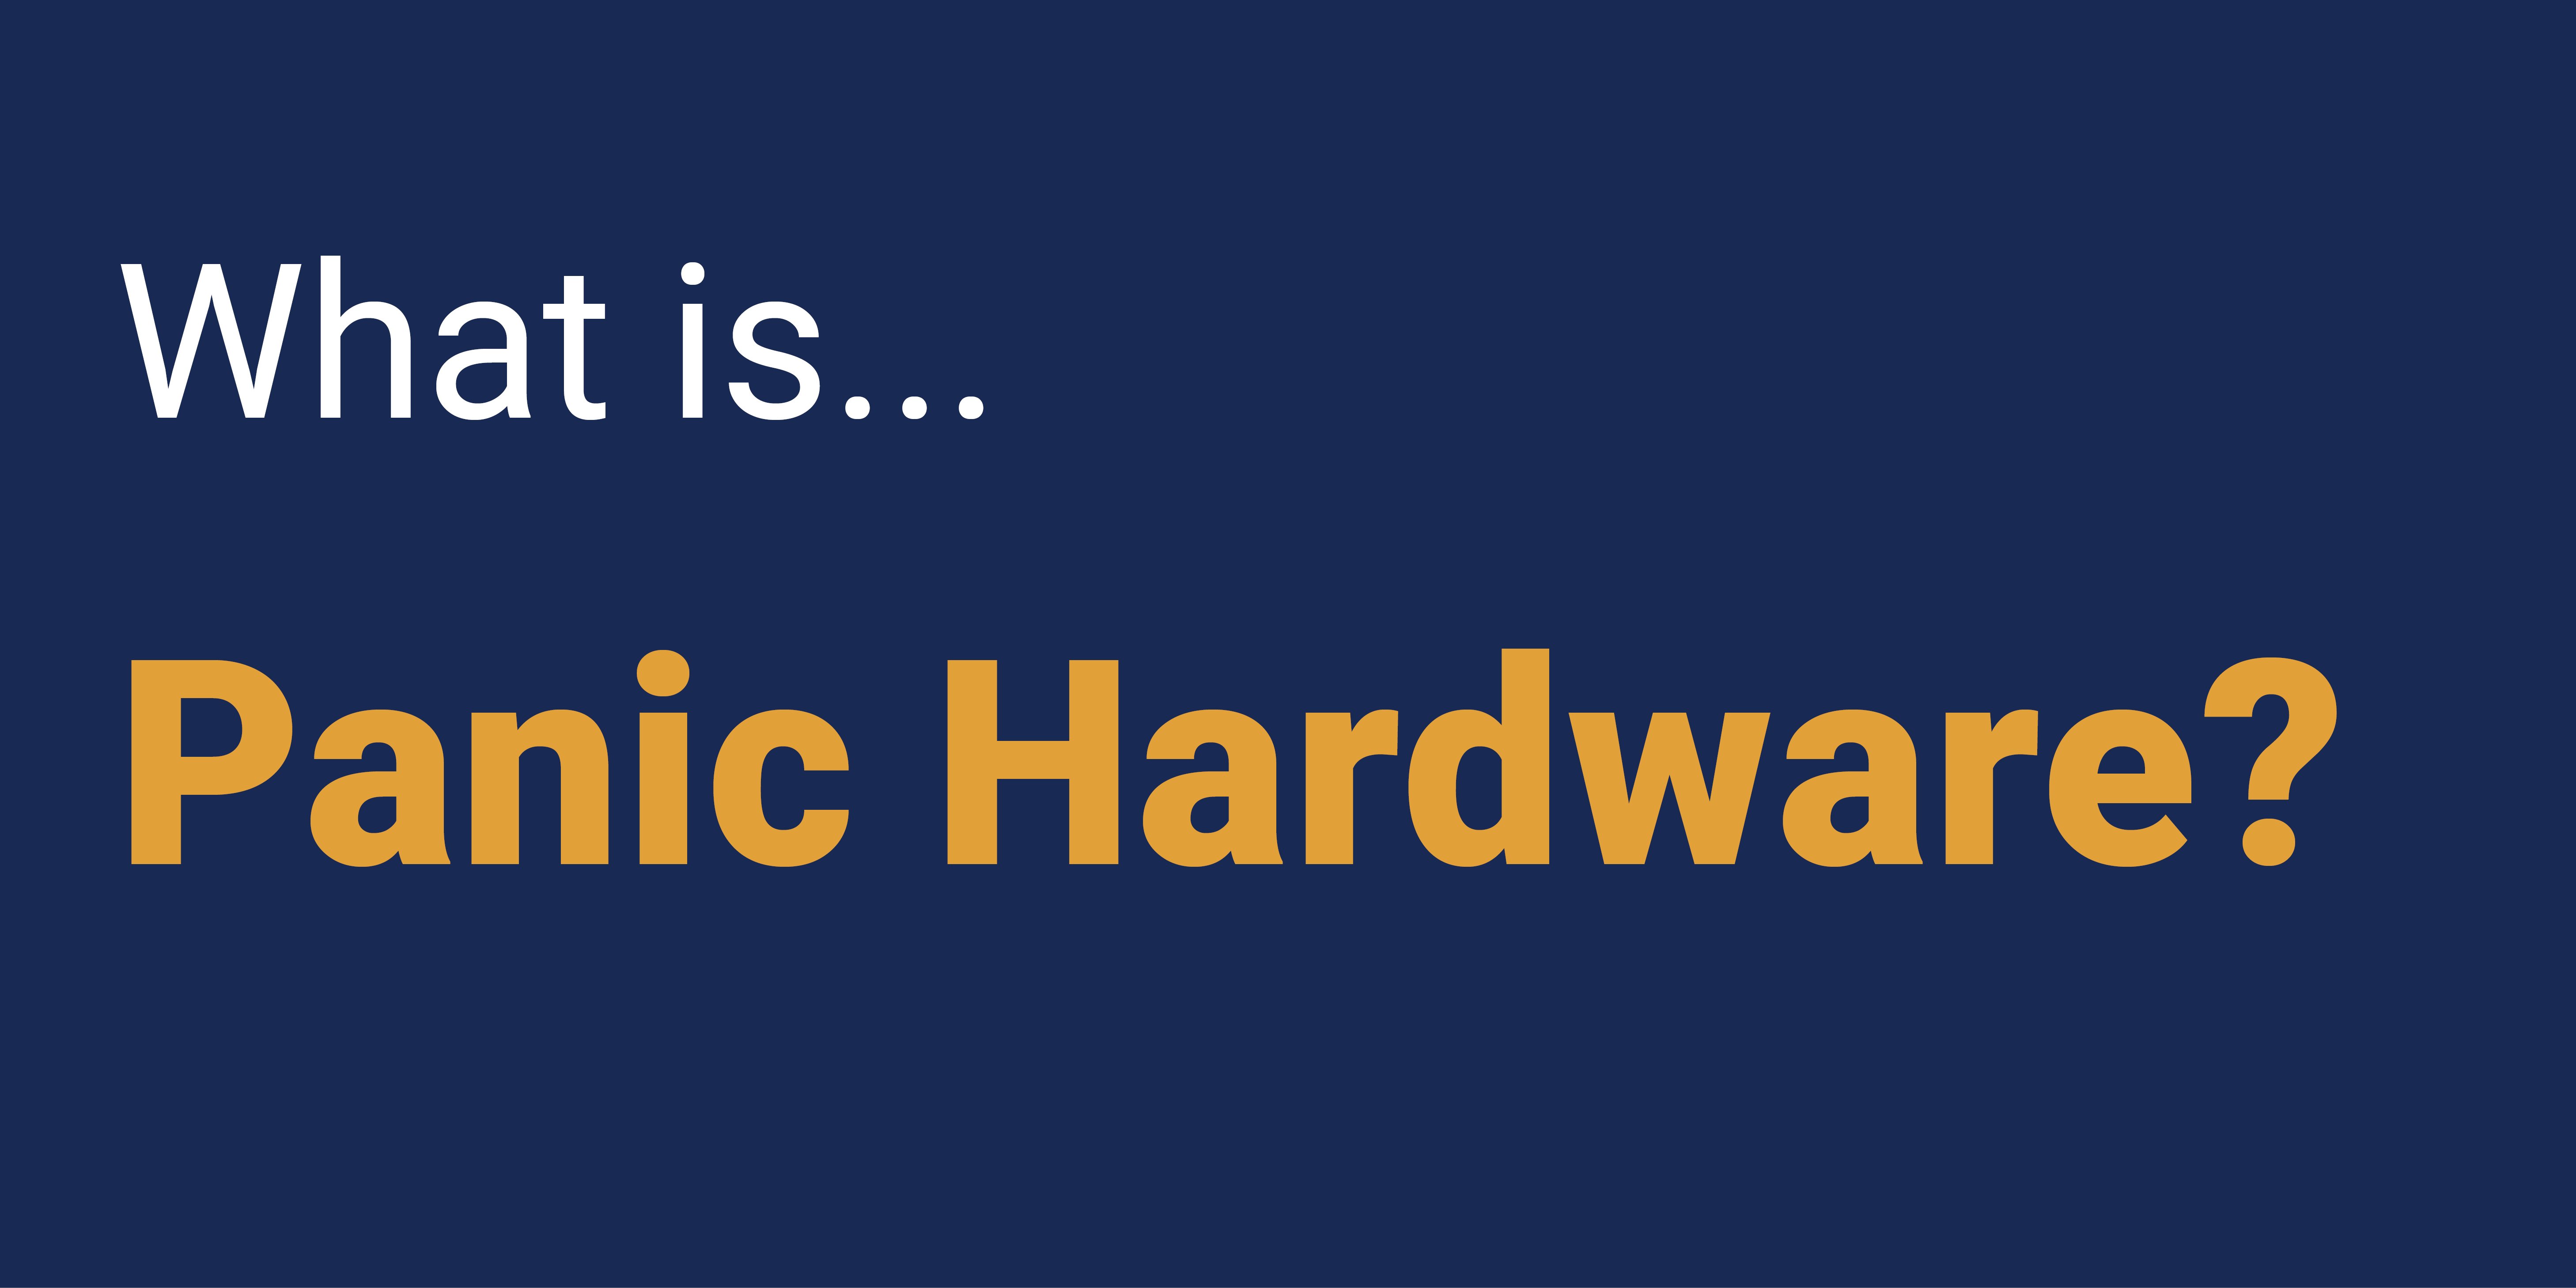 What is Panic Hardware?